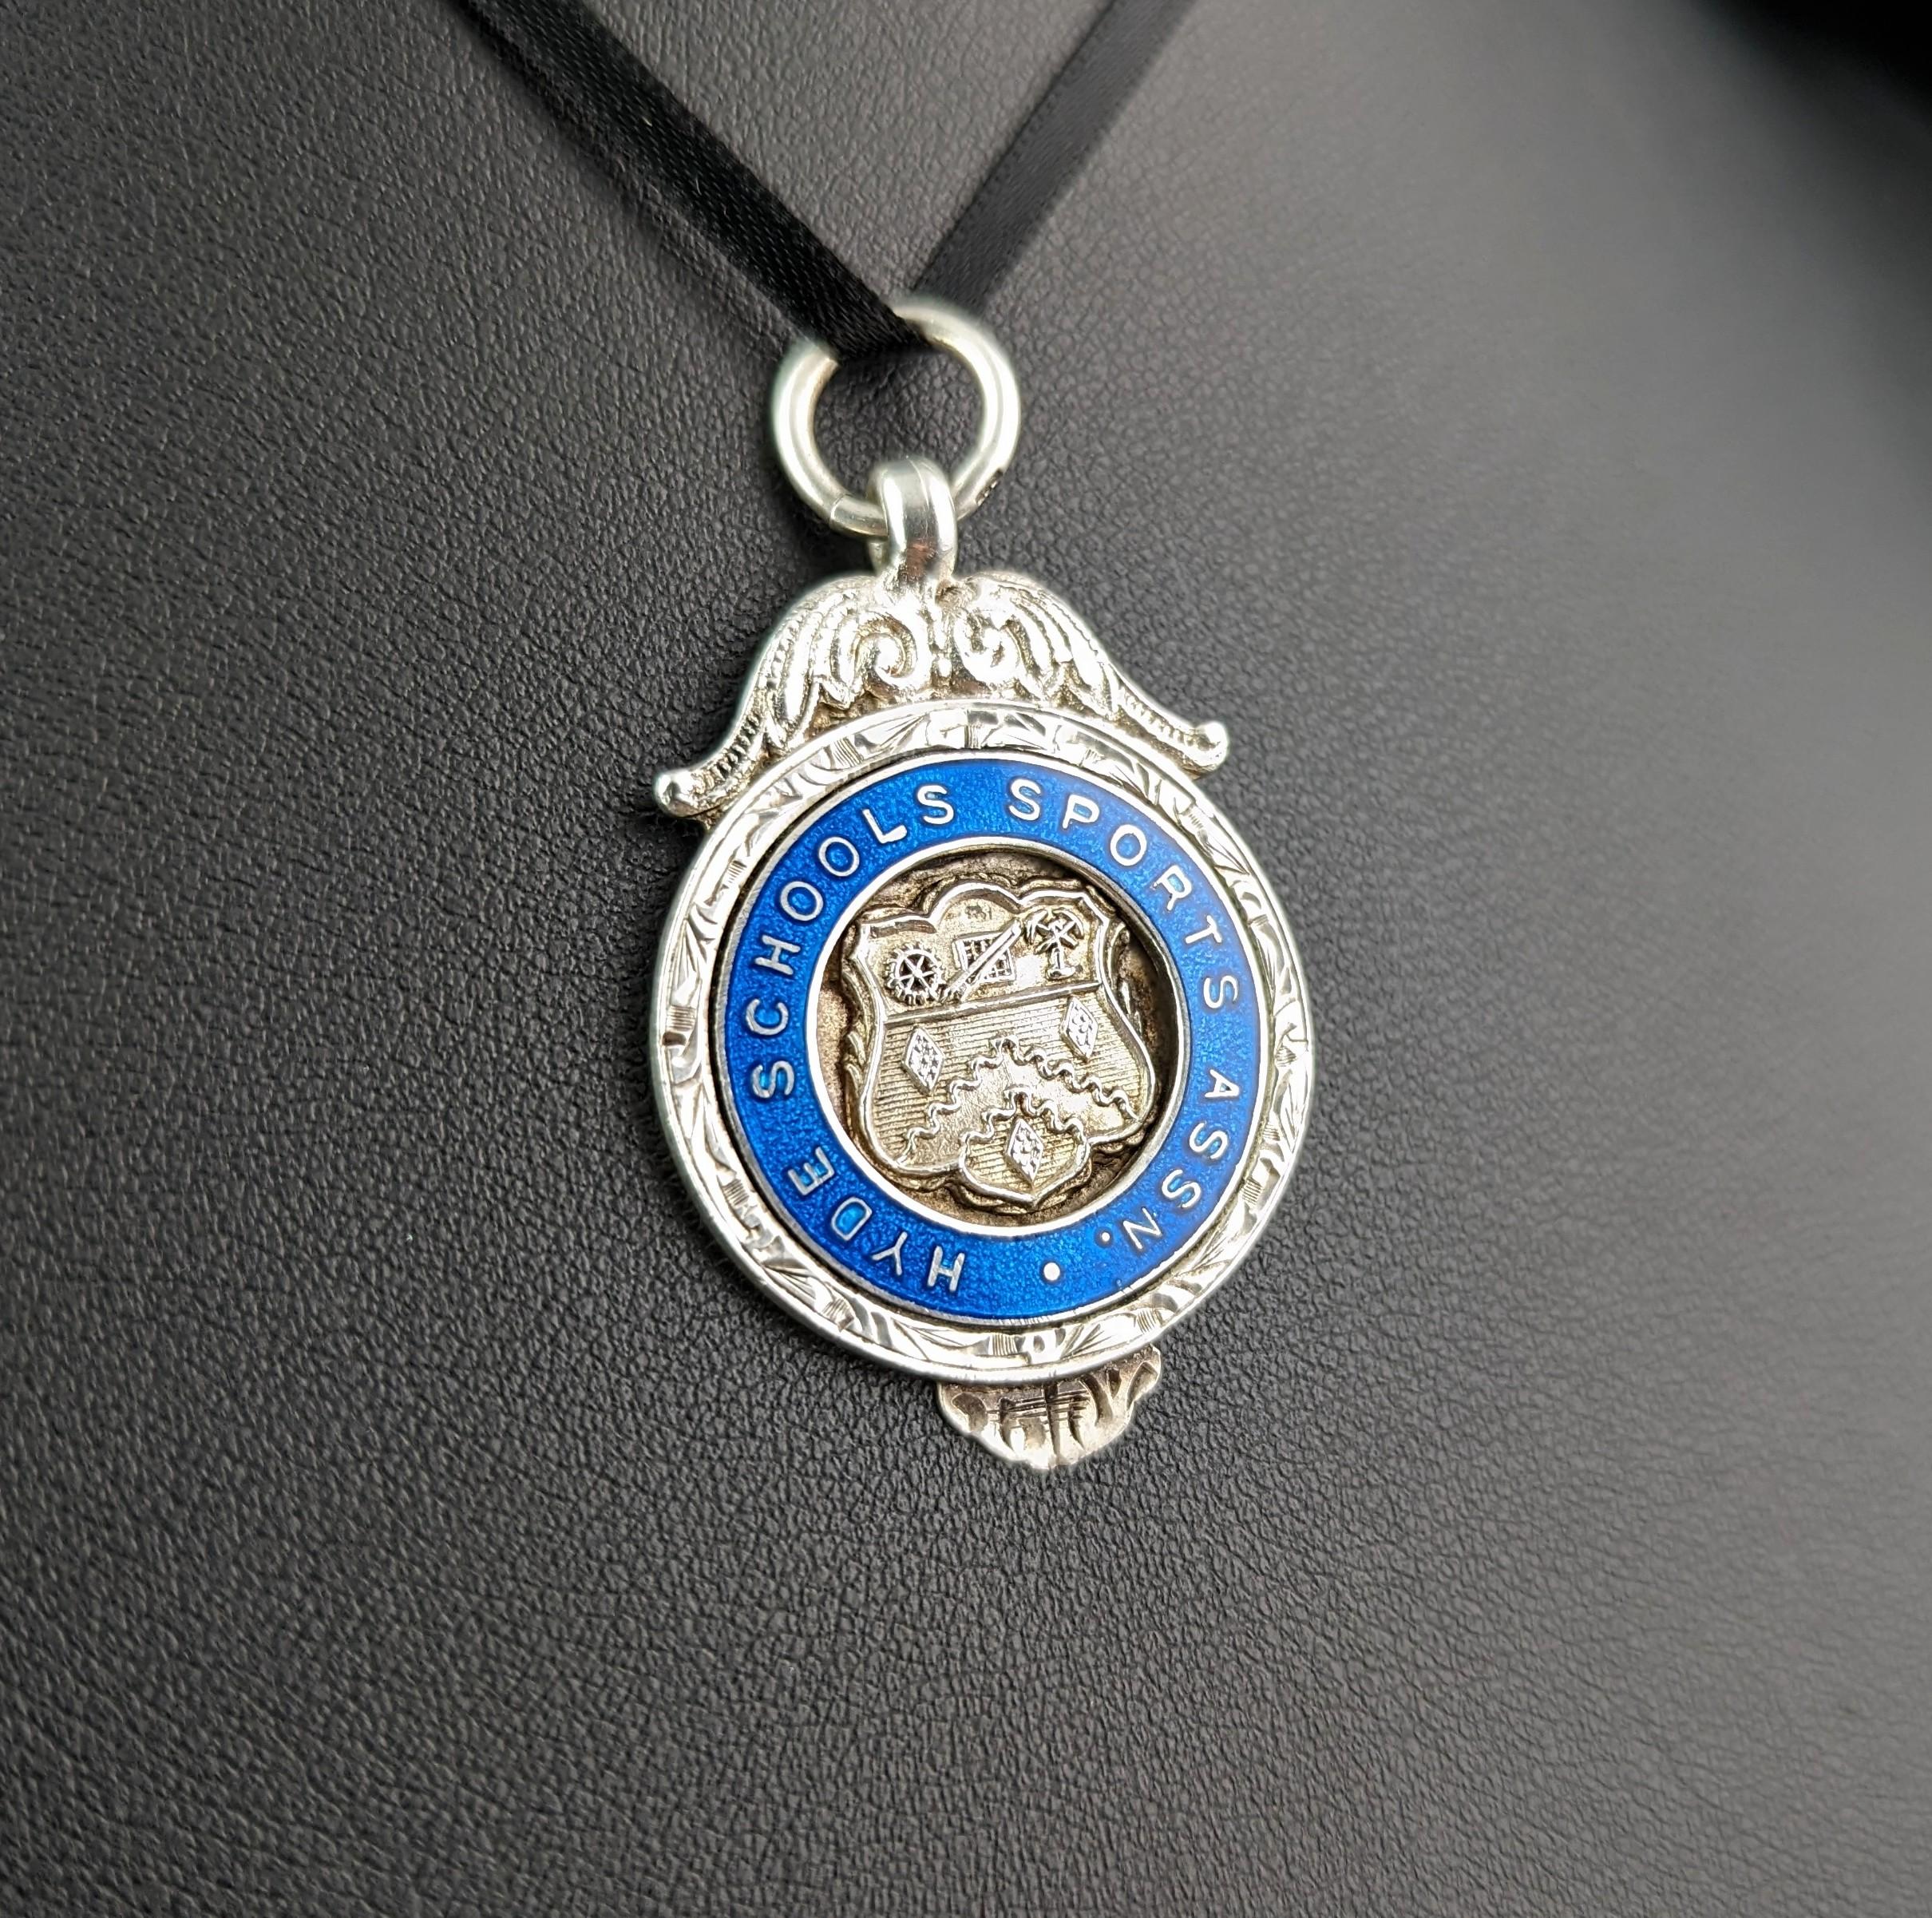 An attractive vintage sterling silver and enamel fob pendant.

It is a circular shaped piece with an attractive vibrant blue enamelled design, the fob has a repousse shield to the centre which is decorated with a number of tiny symbols, a very